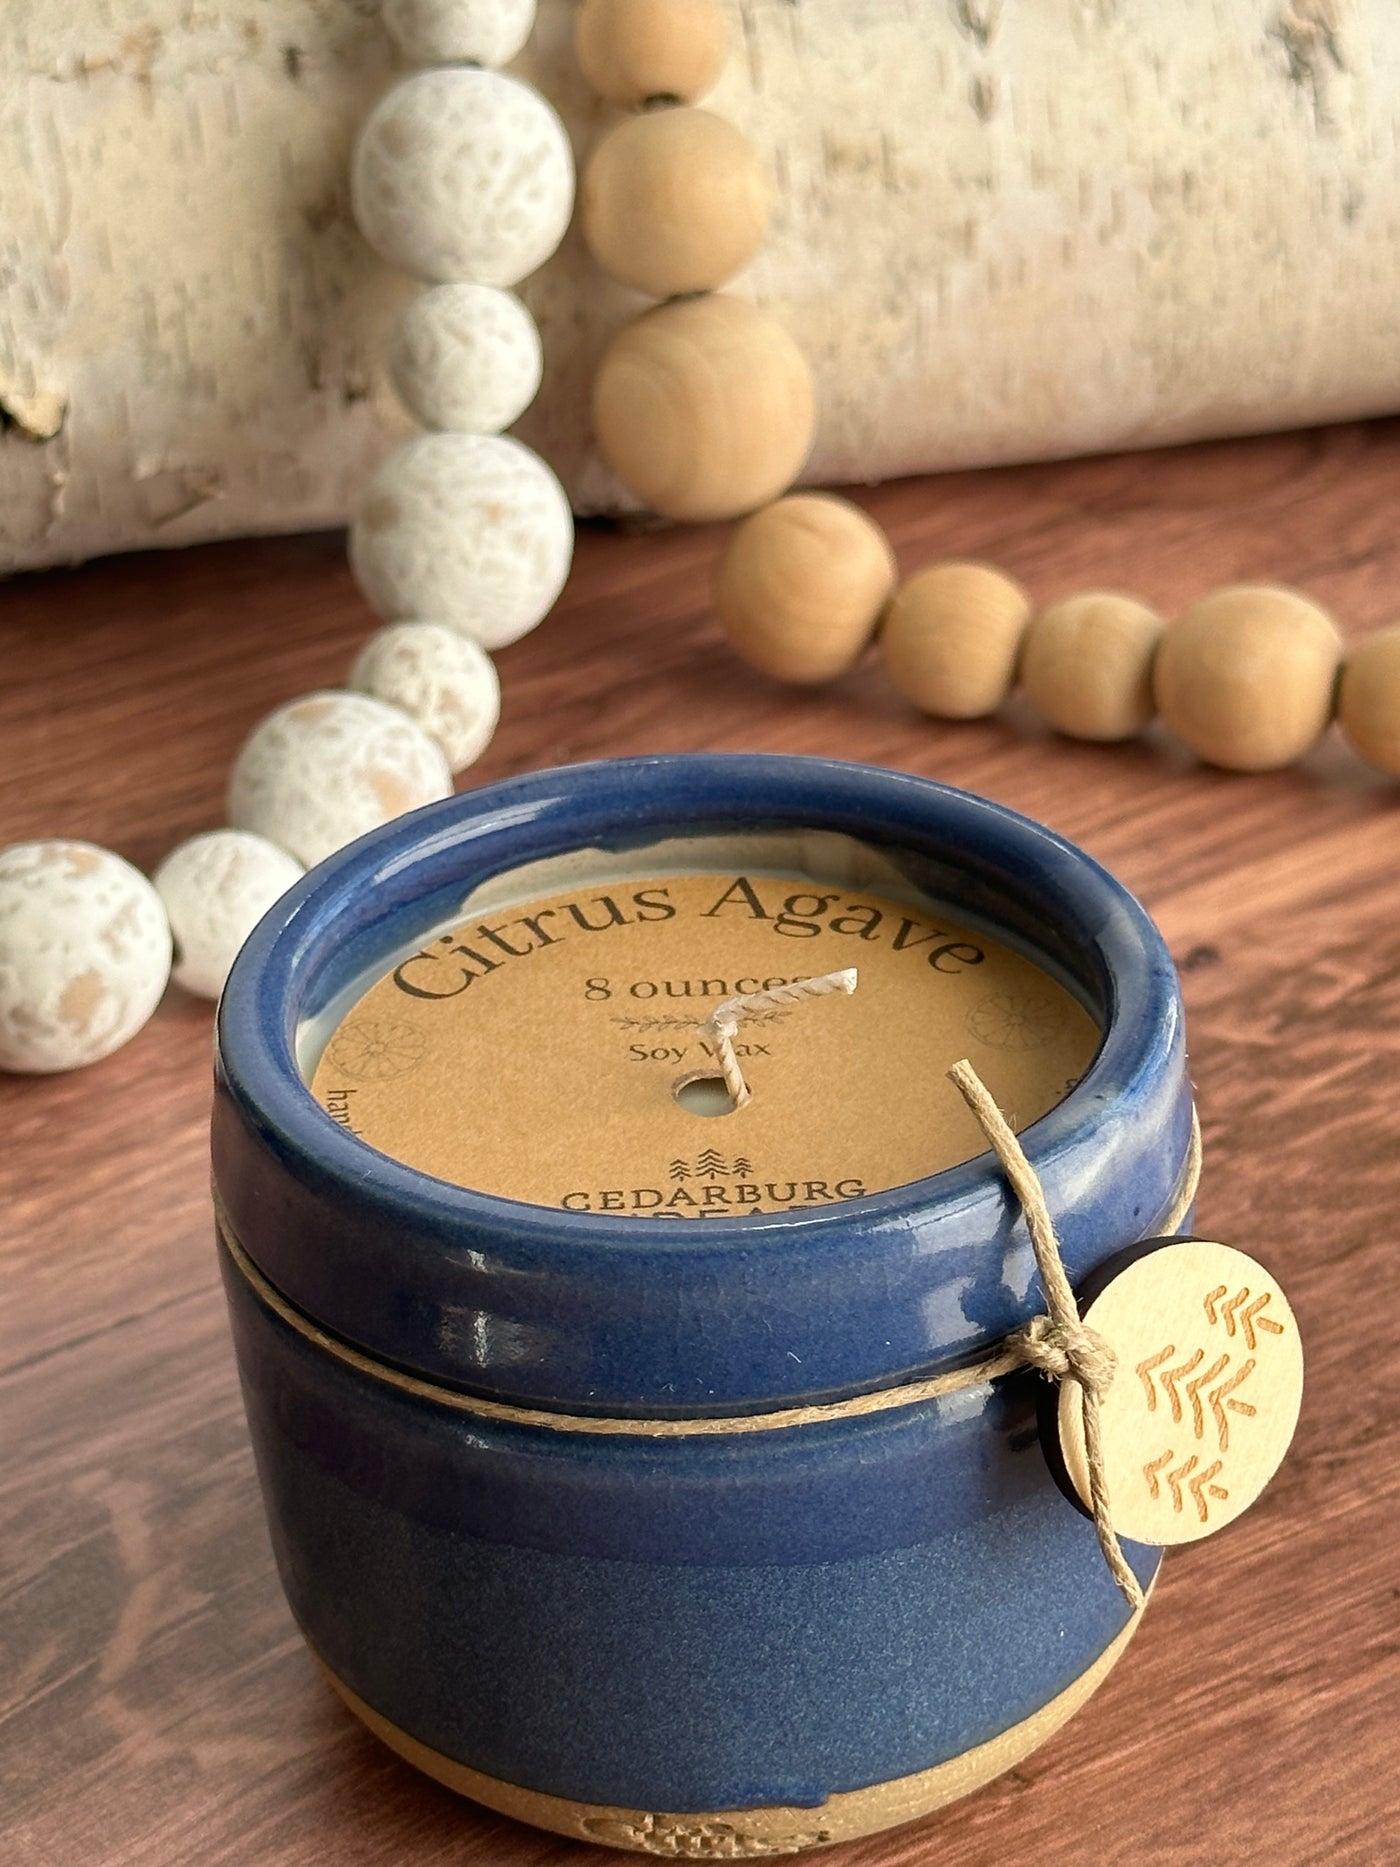 Citrus Agave hand poured soy candle in 8 ounce blue ceramic candle vessel